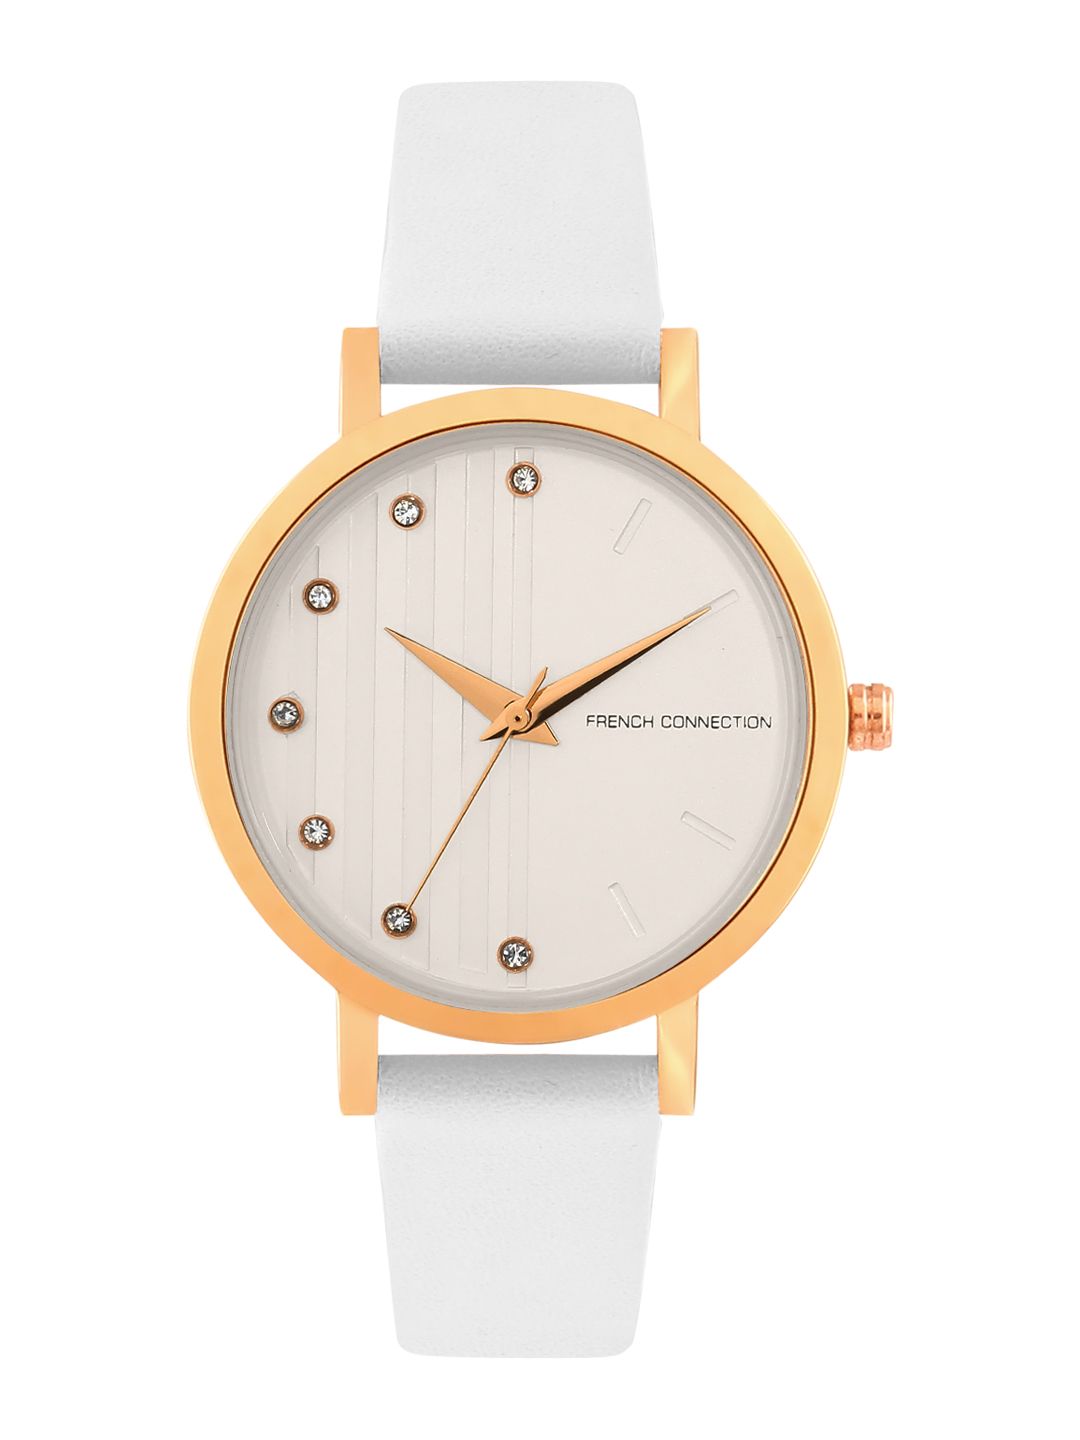 French Connection Women Off-White Analogue Watch FC20-63B Price in India